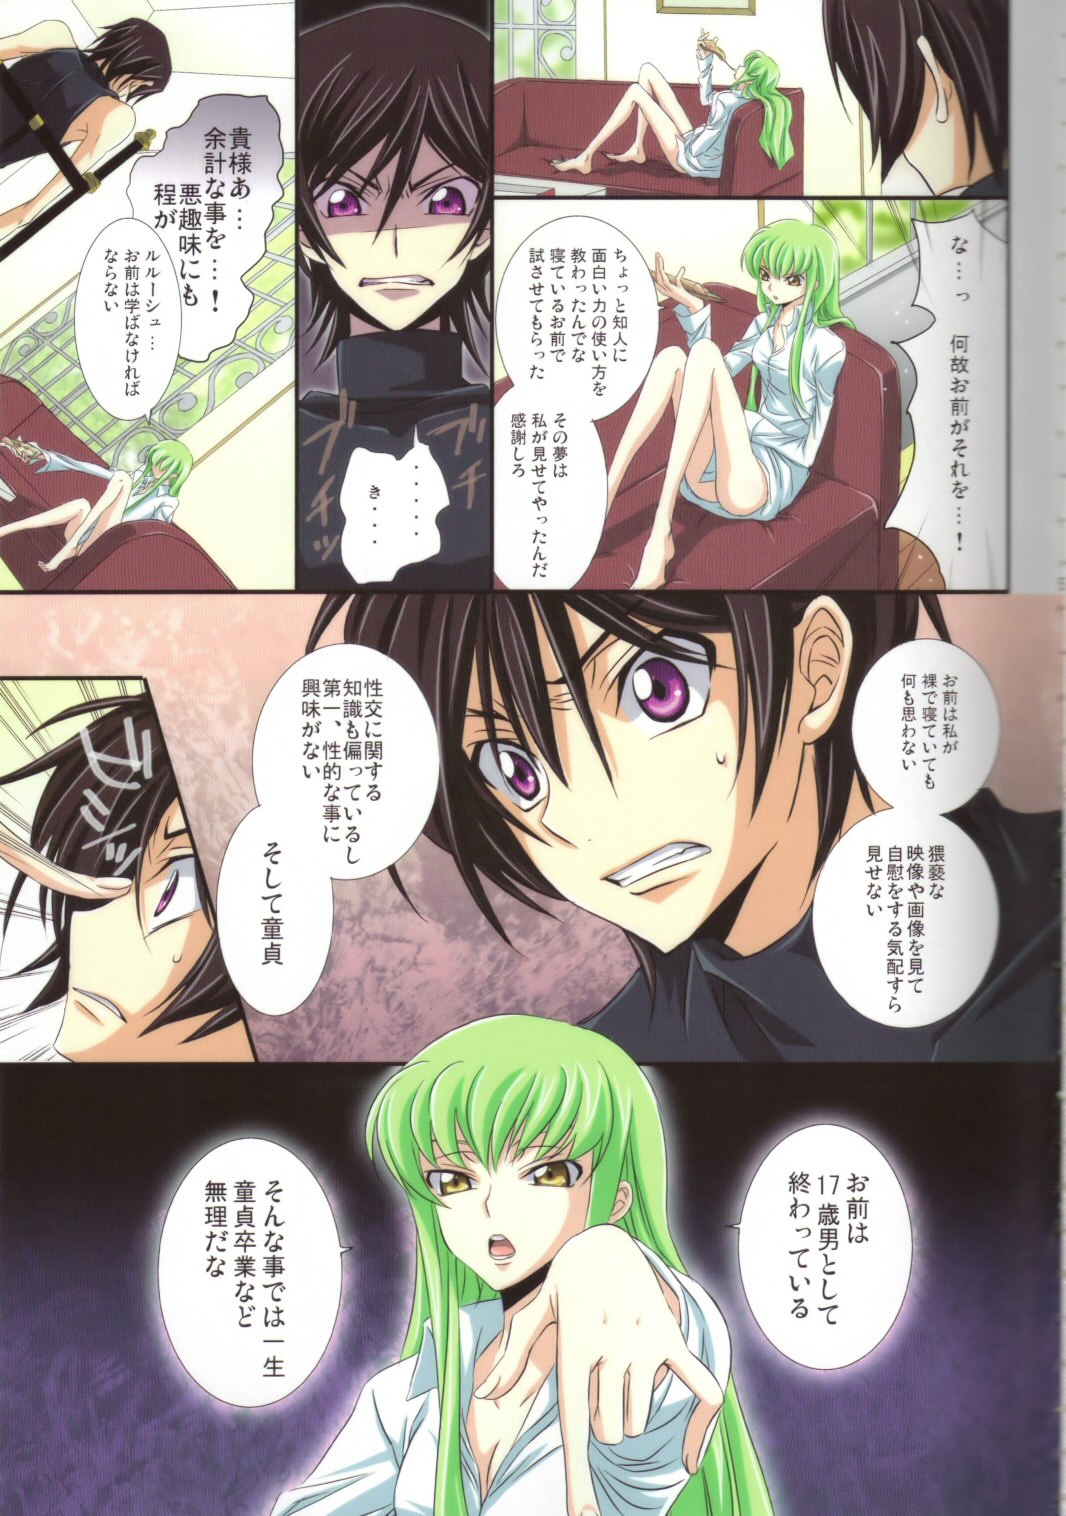 [Cou] on・non・om (Code Geass) 